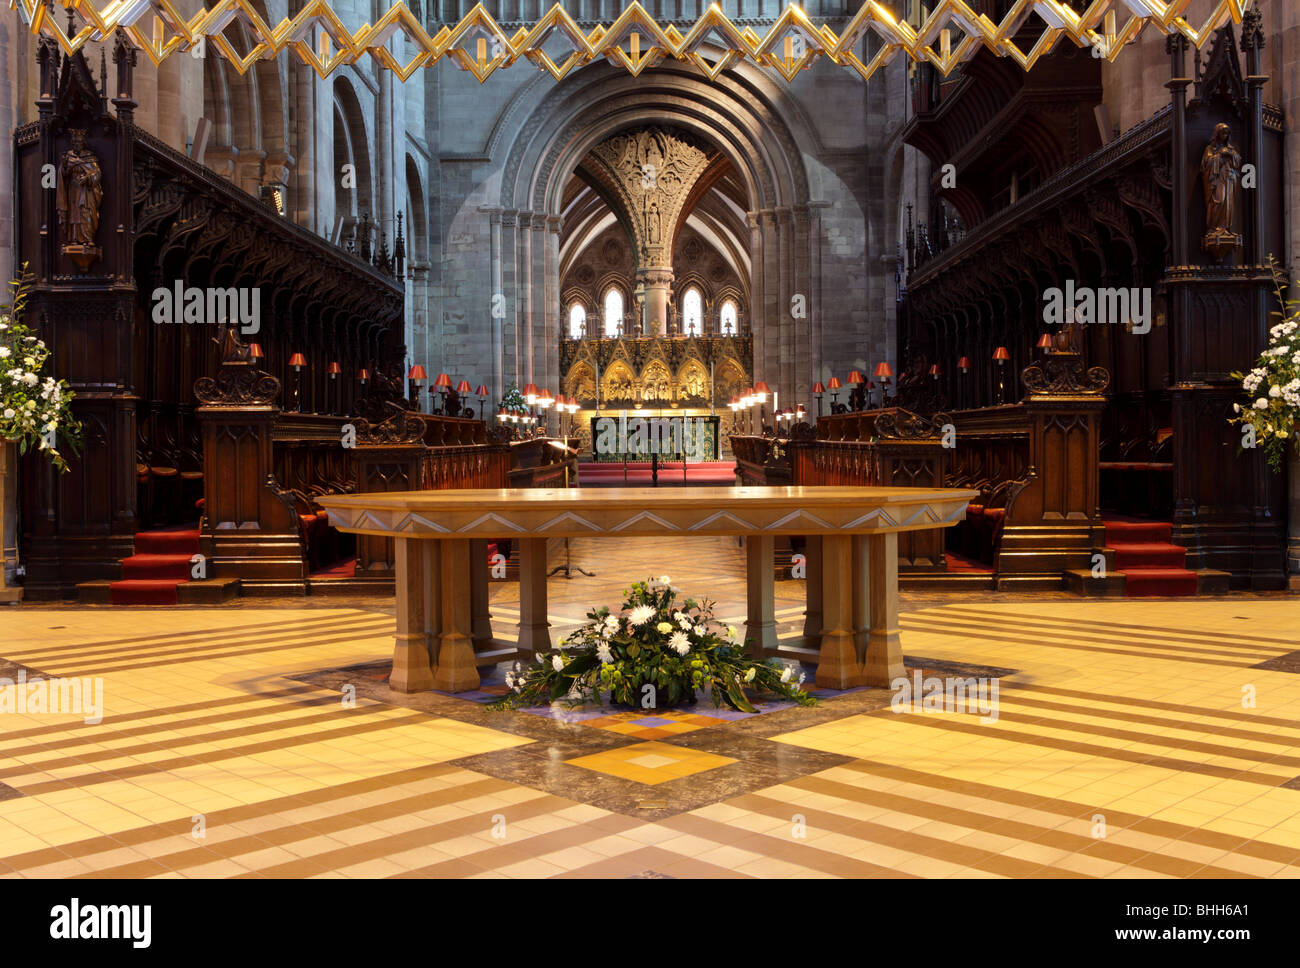 The Hereford Corona looking down on the Altar Table at Hereford Cathedral. Stock Photo